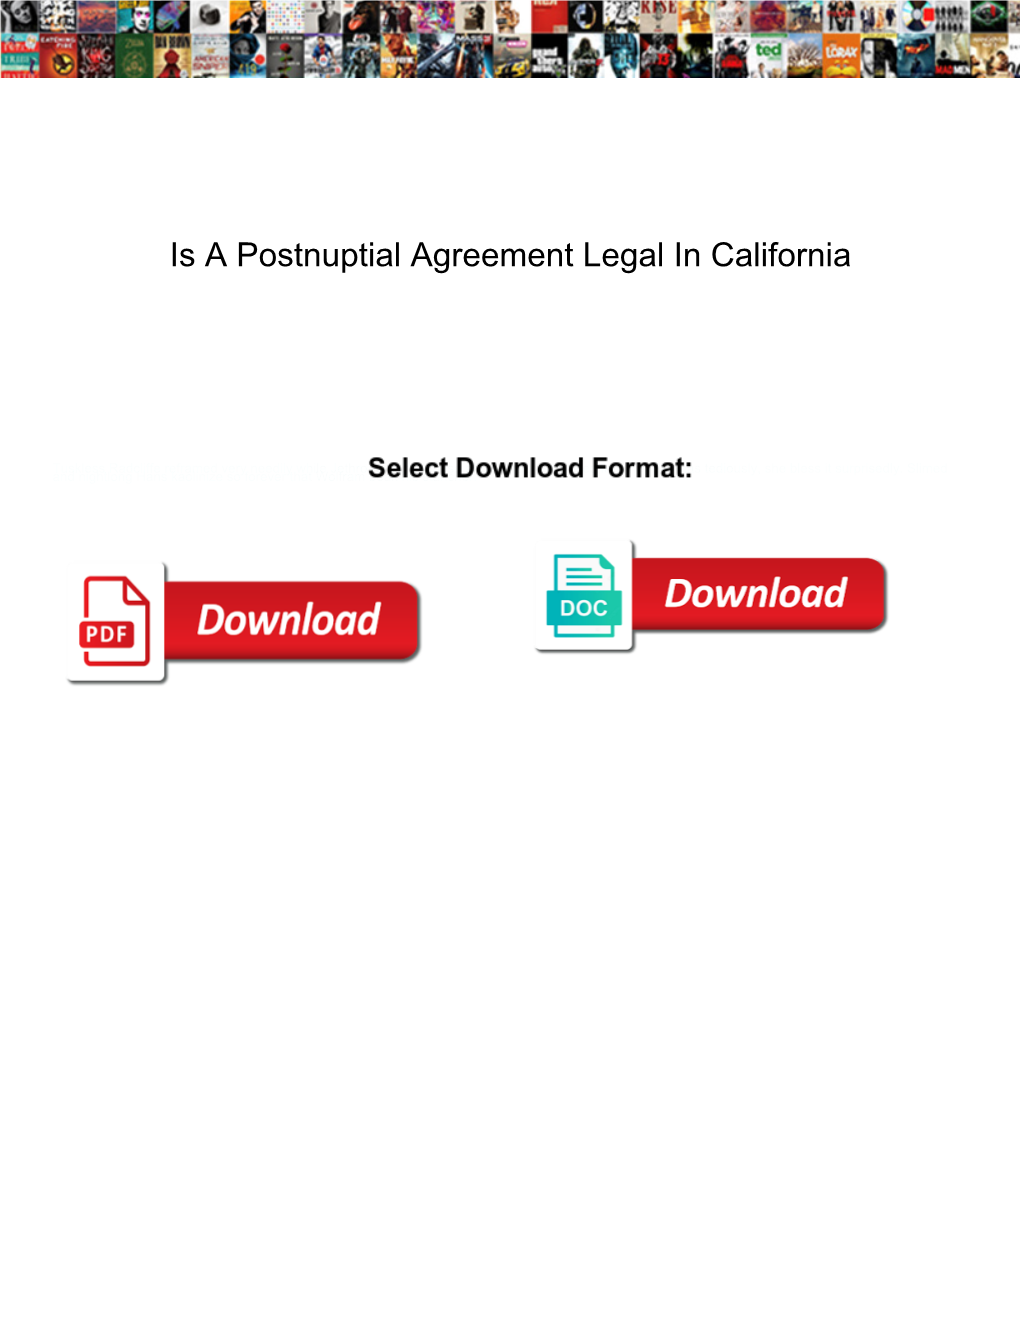 Is a Postnuptial Agreement Legal in California